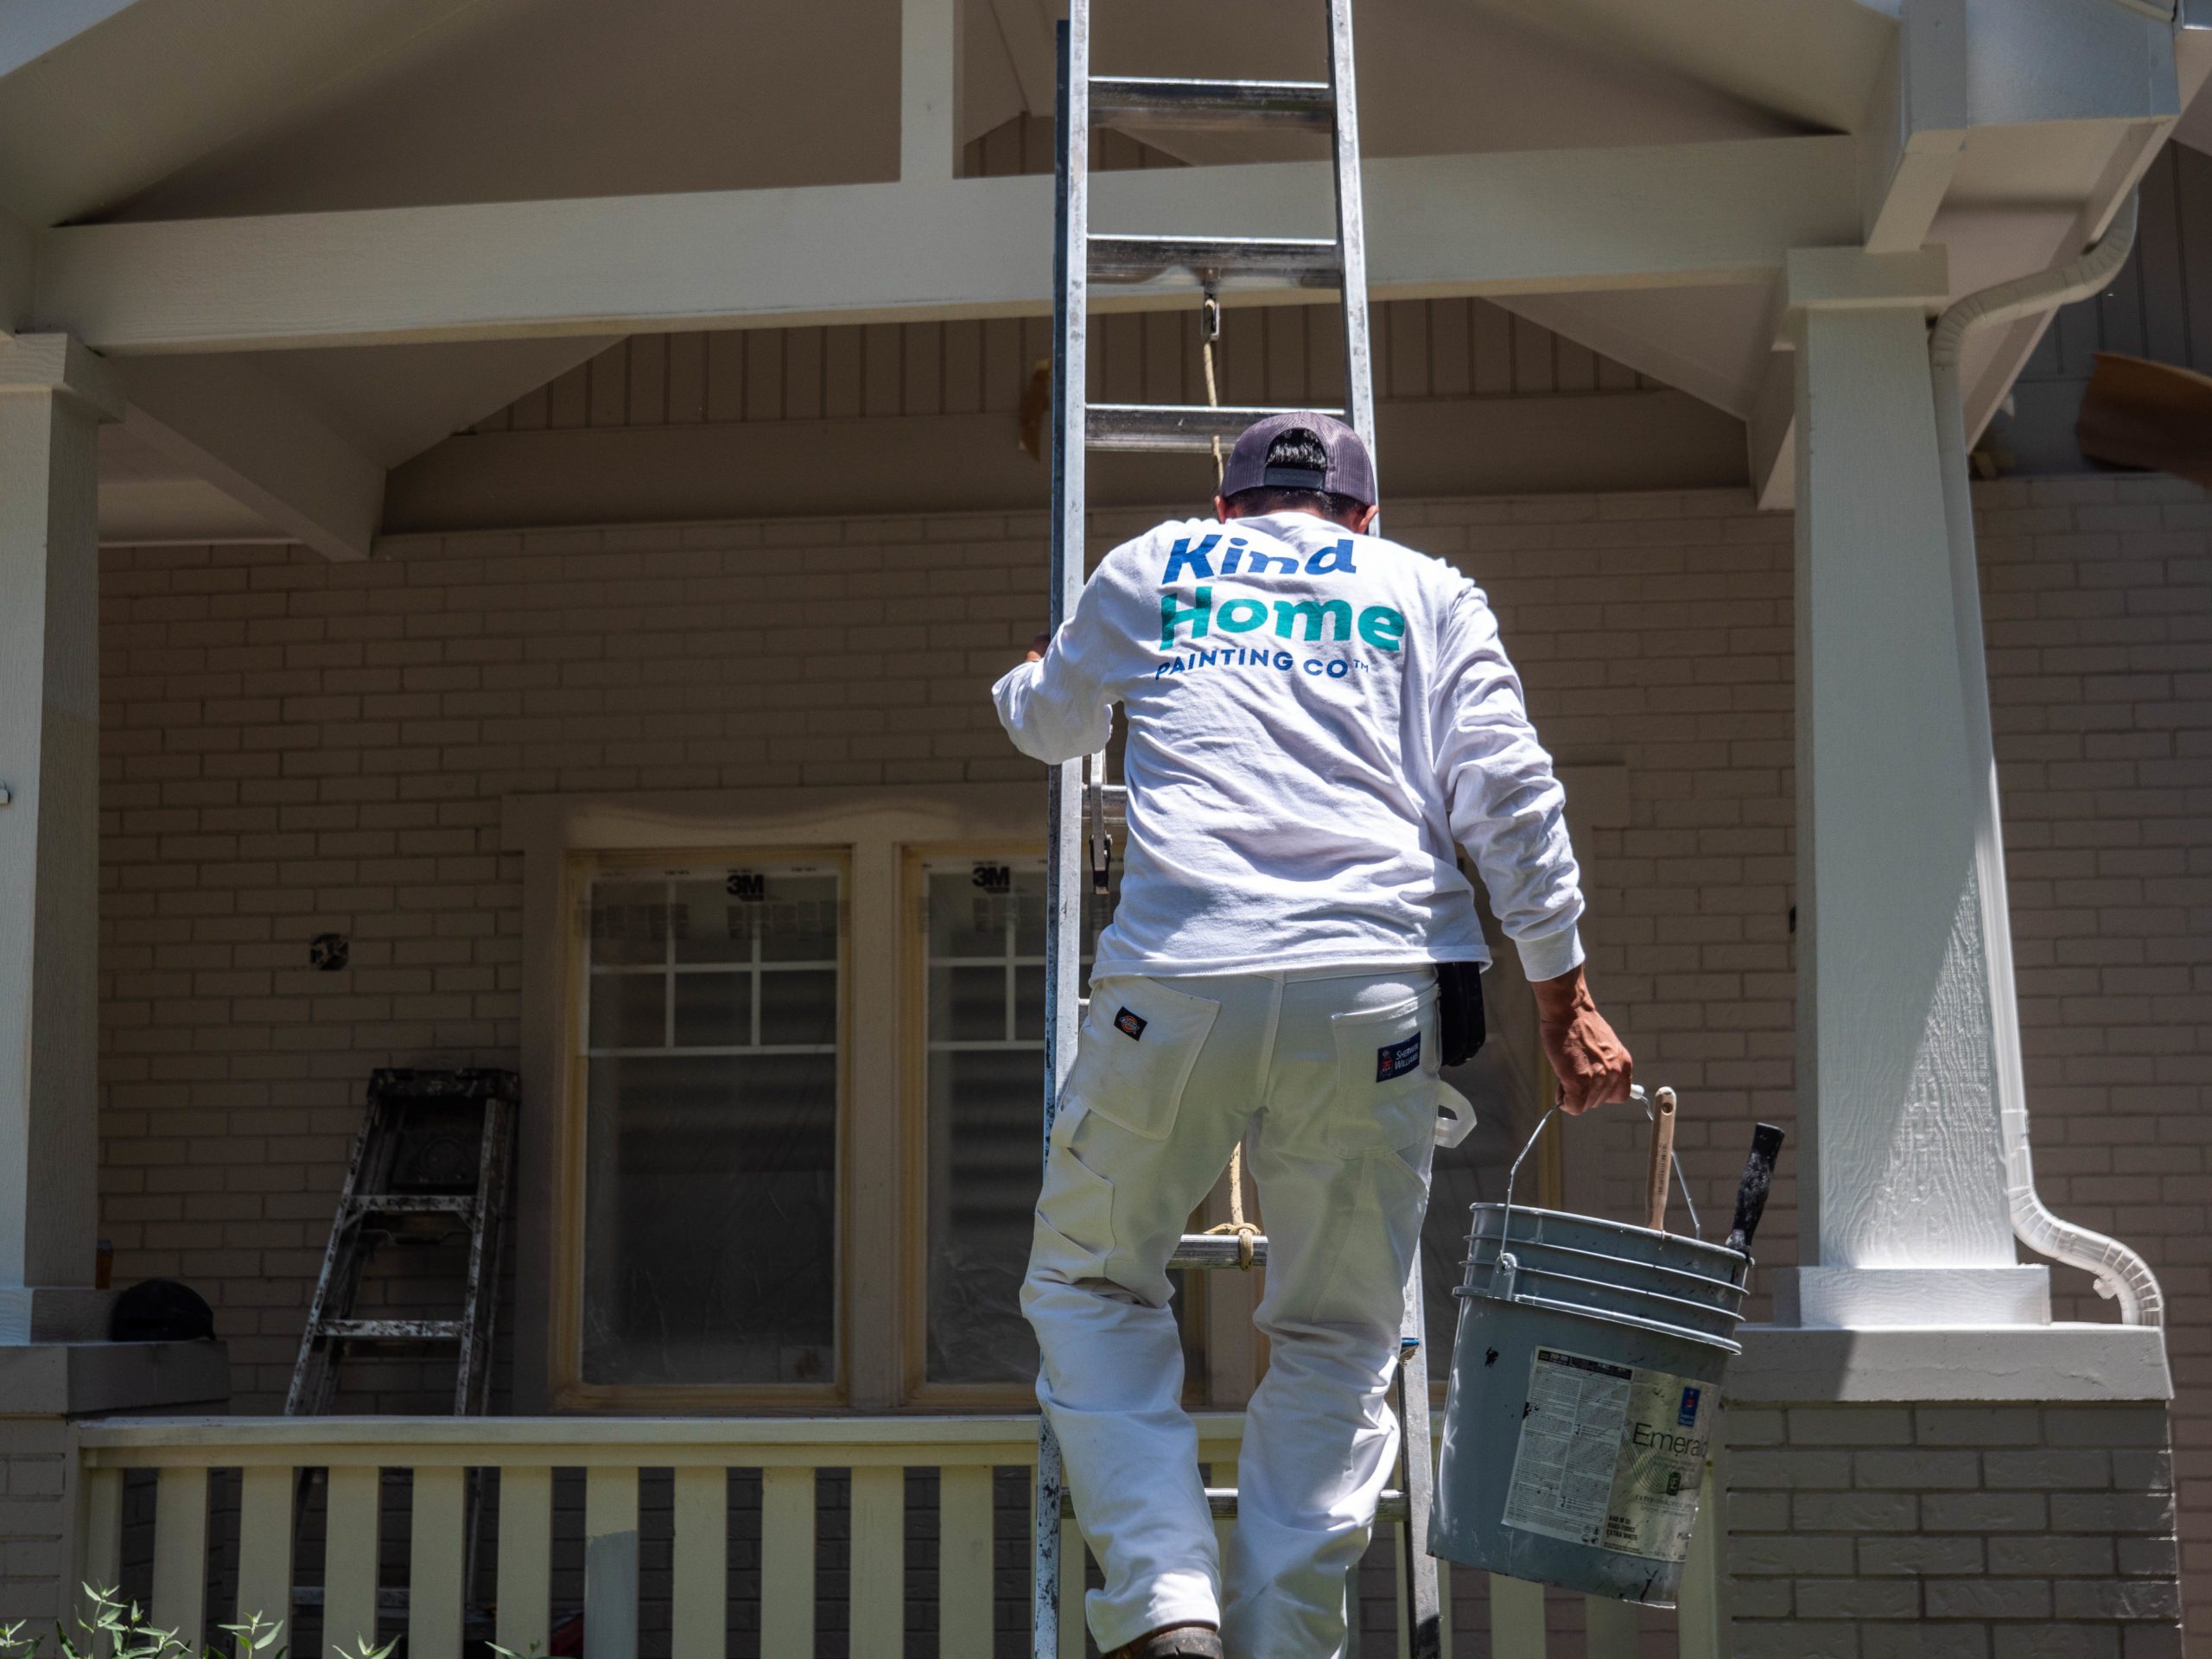 photo of a kind home painter climbing down a ladder